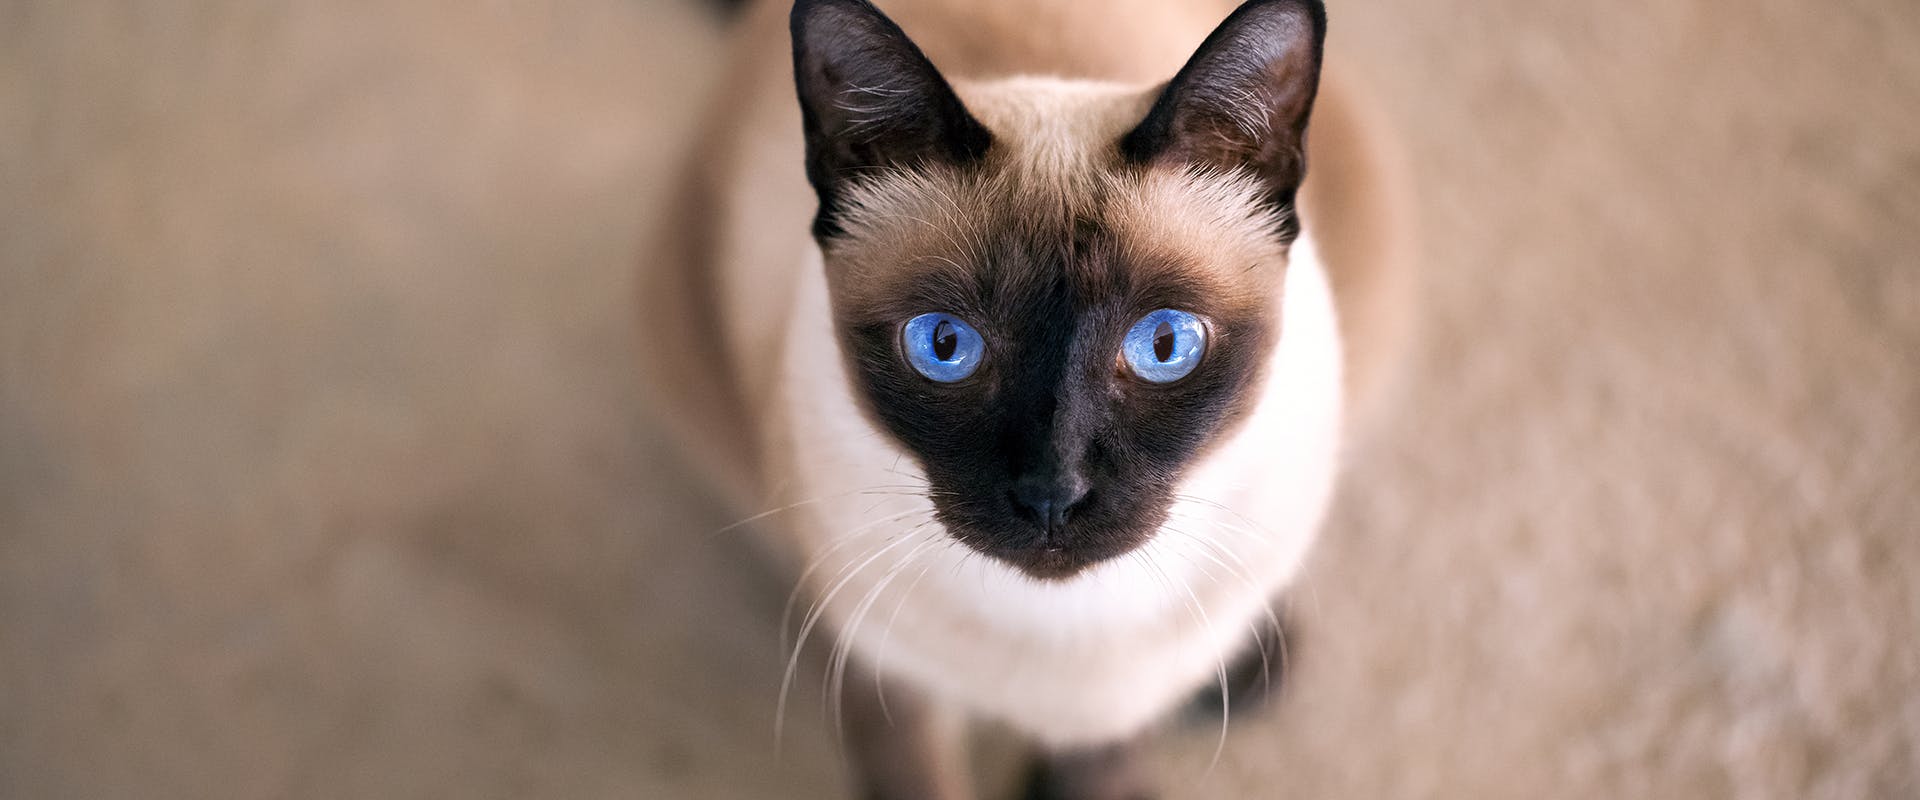 A friendly and affectionate Siamese cat from above